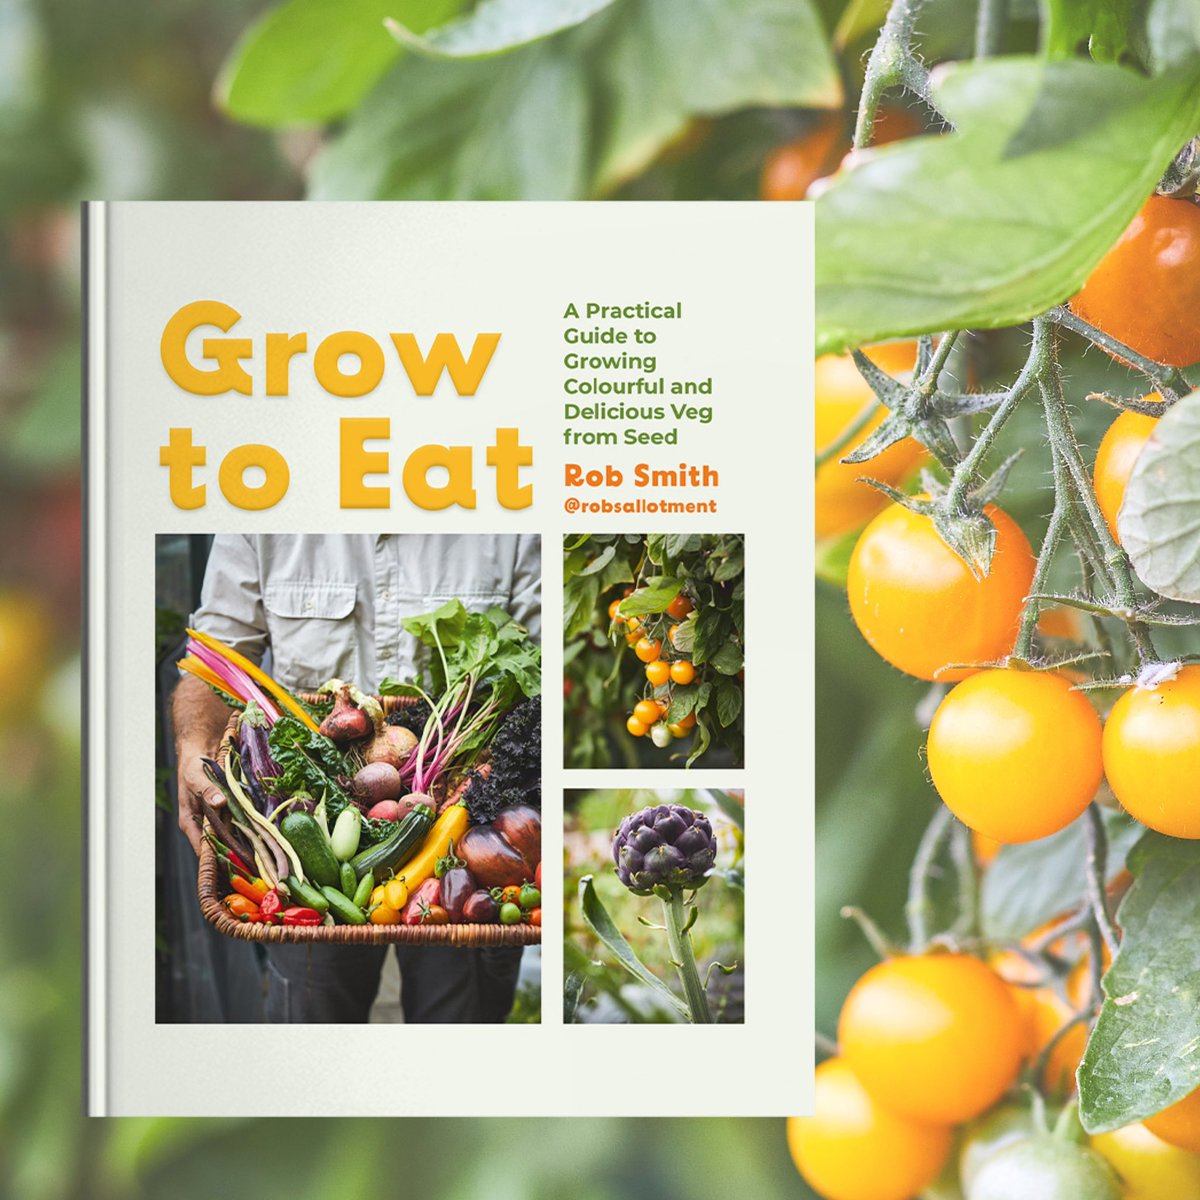 Proud to announce ‘Grow to Eat’ was published in the USA today, with Europe & UK later this week and Australia in early April! #newbook #book